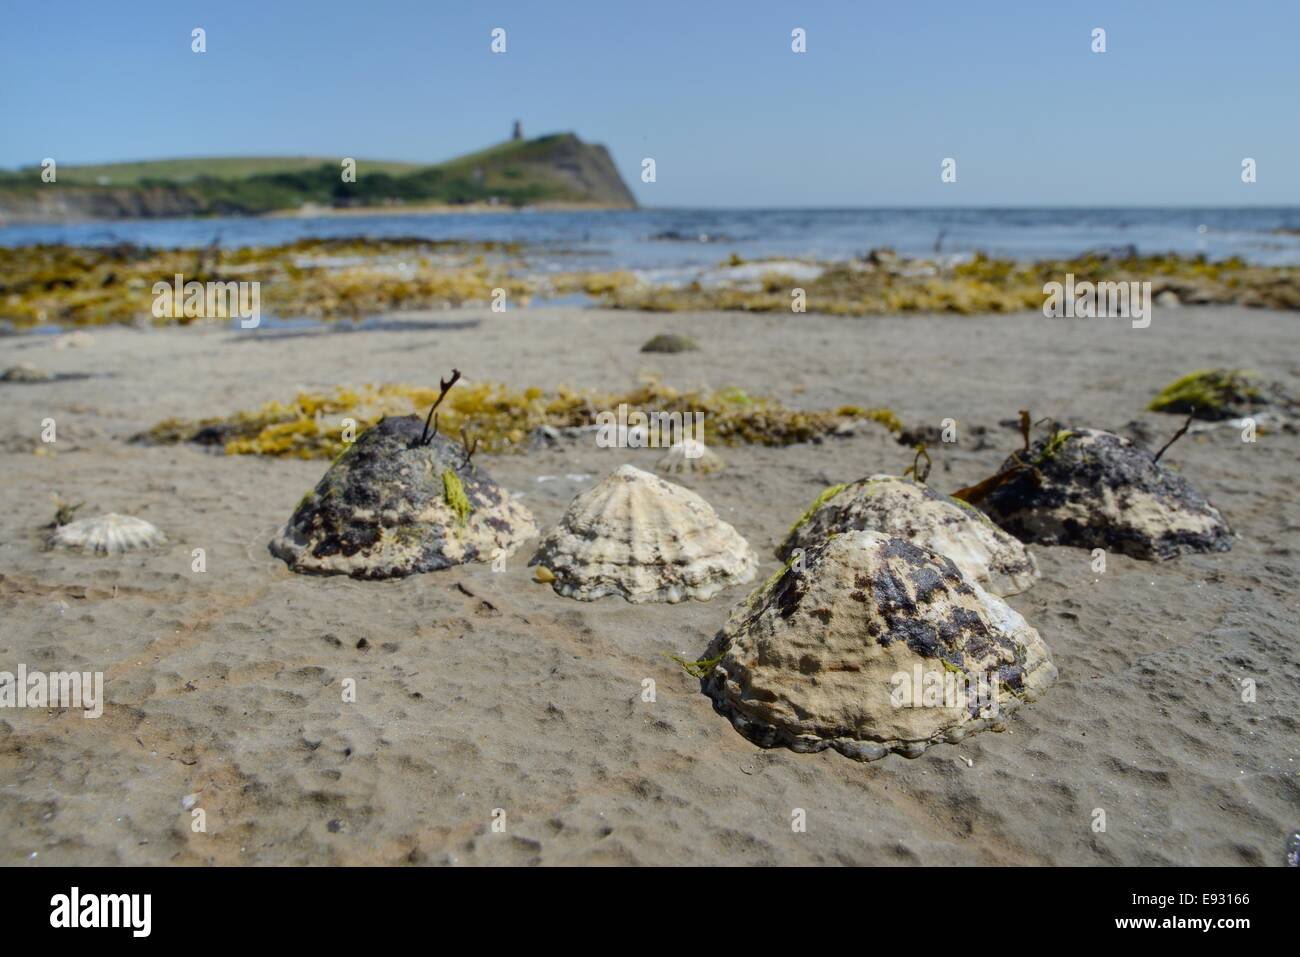 Common limpets (Patella vulgata) attached to rocks exposed at low tide, Kimmeridge, Dorset, UK, July. Stock Photo